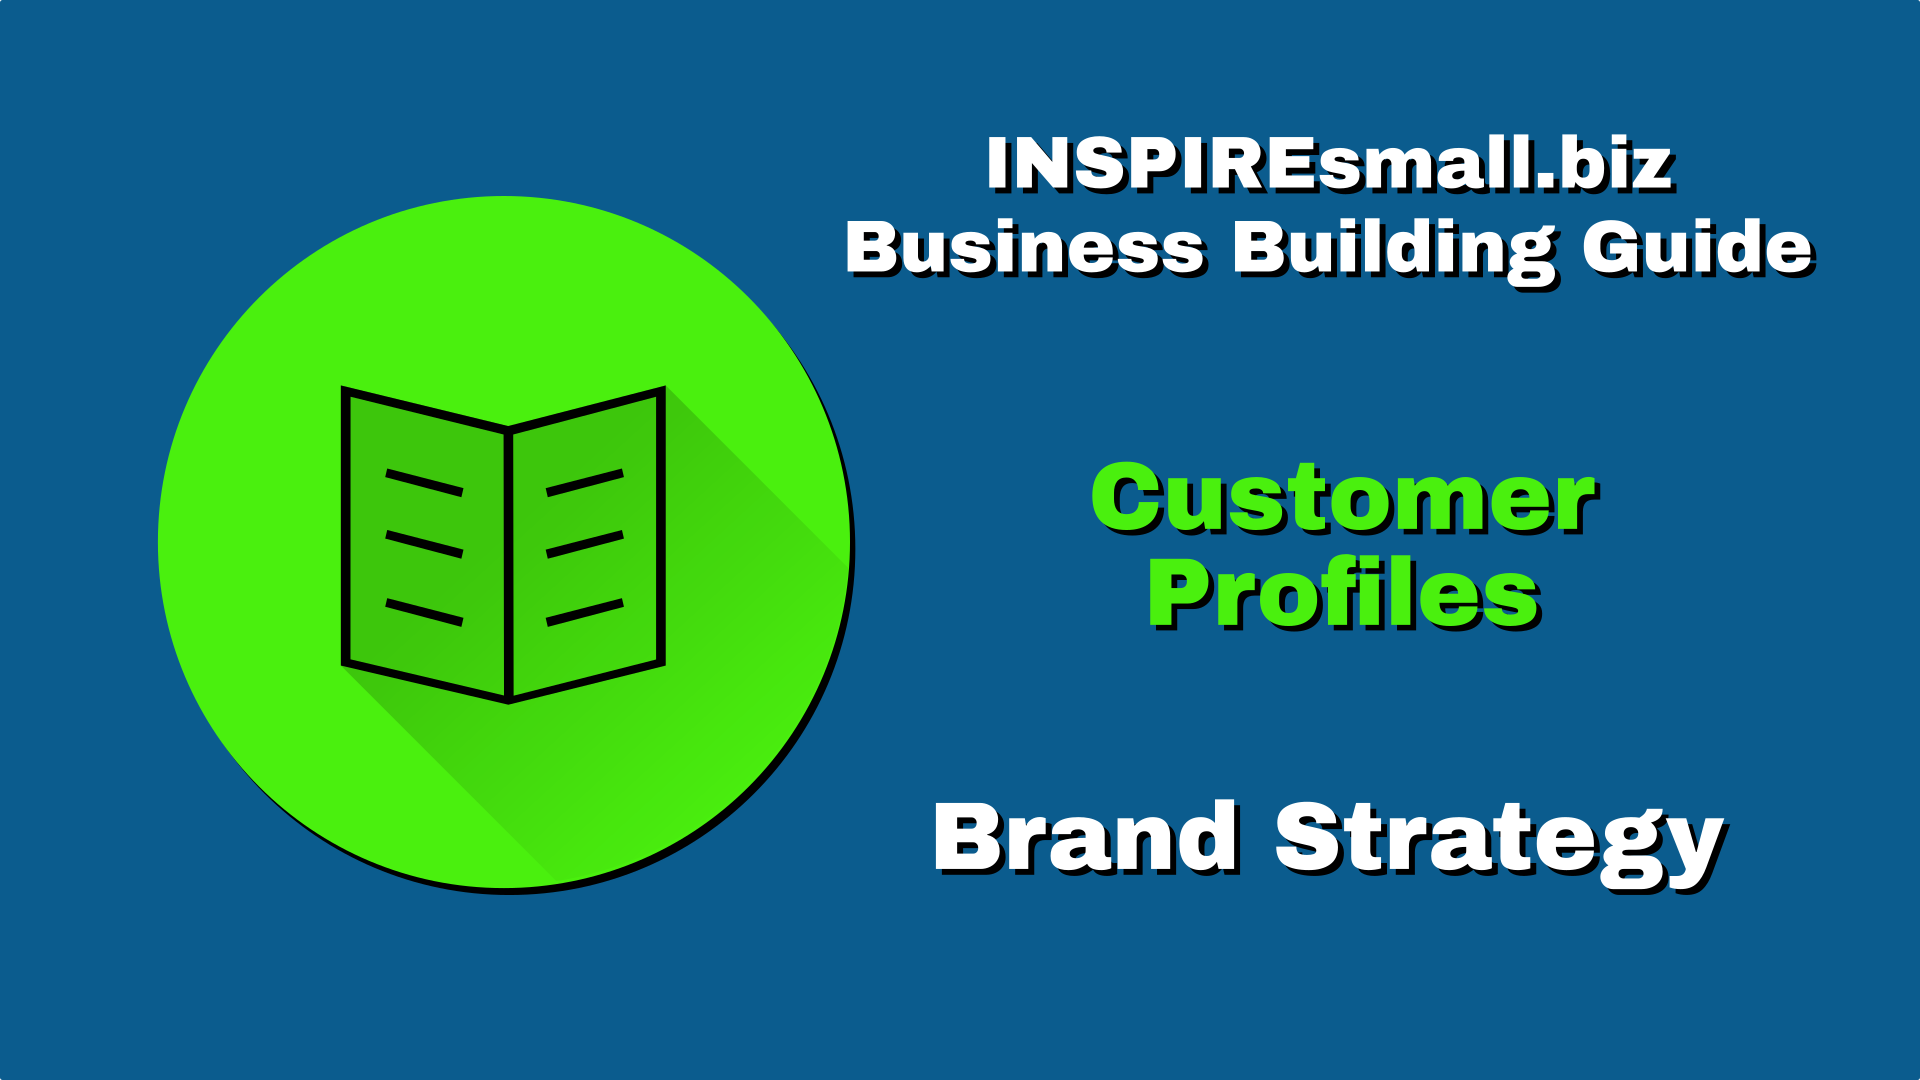 INSPIREsmall.biz Business Building Guides; Brand Strategy Section; Customer Profiles